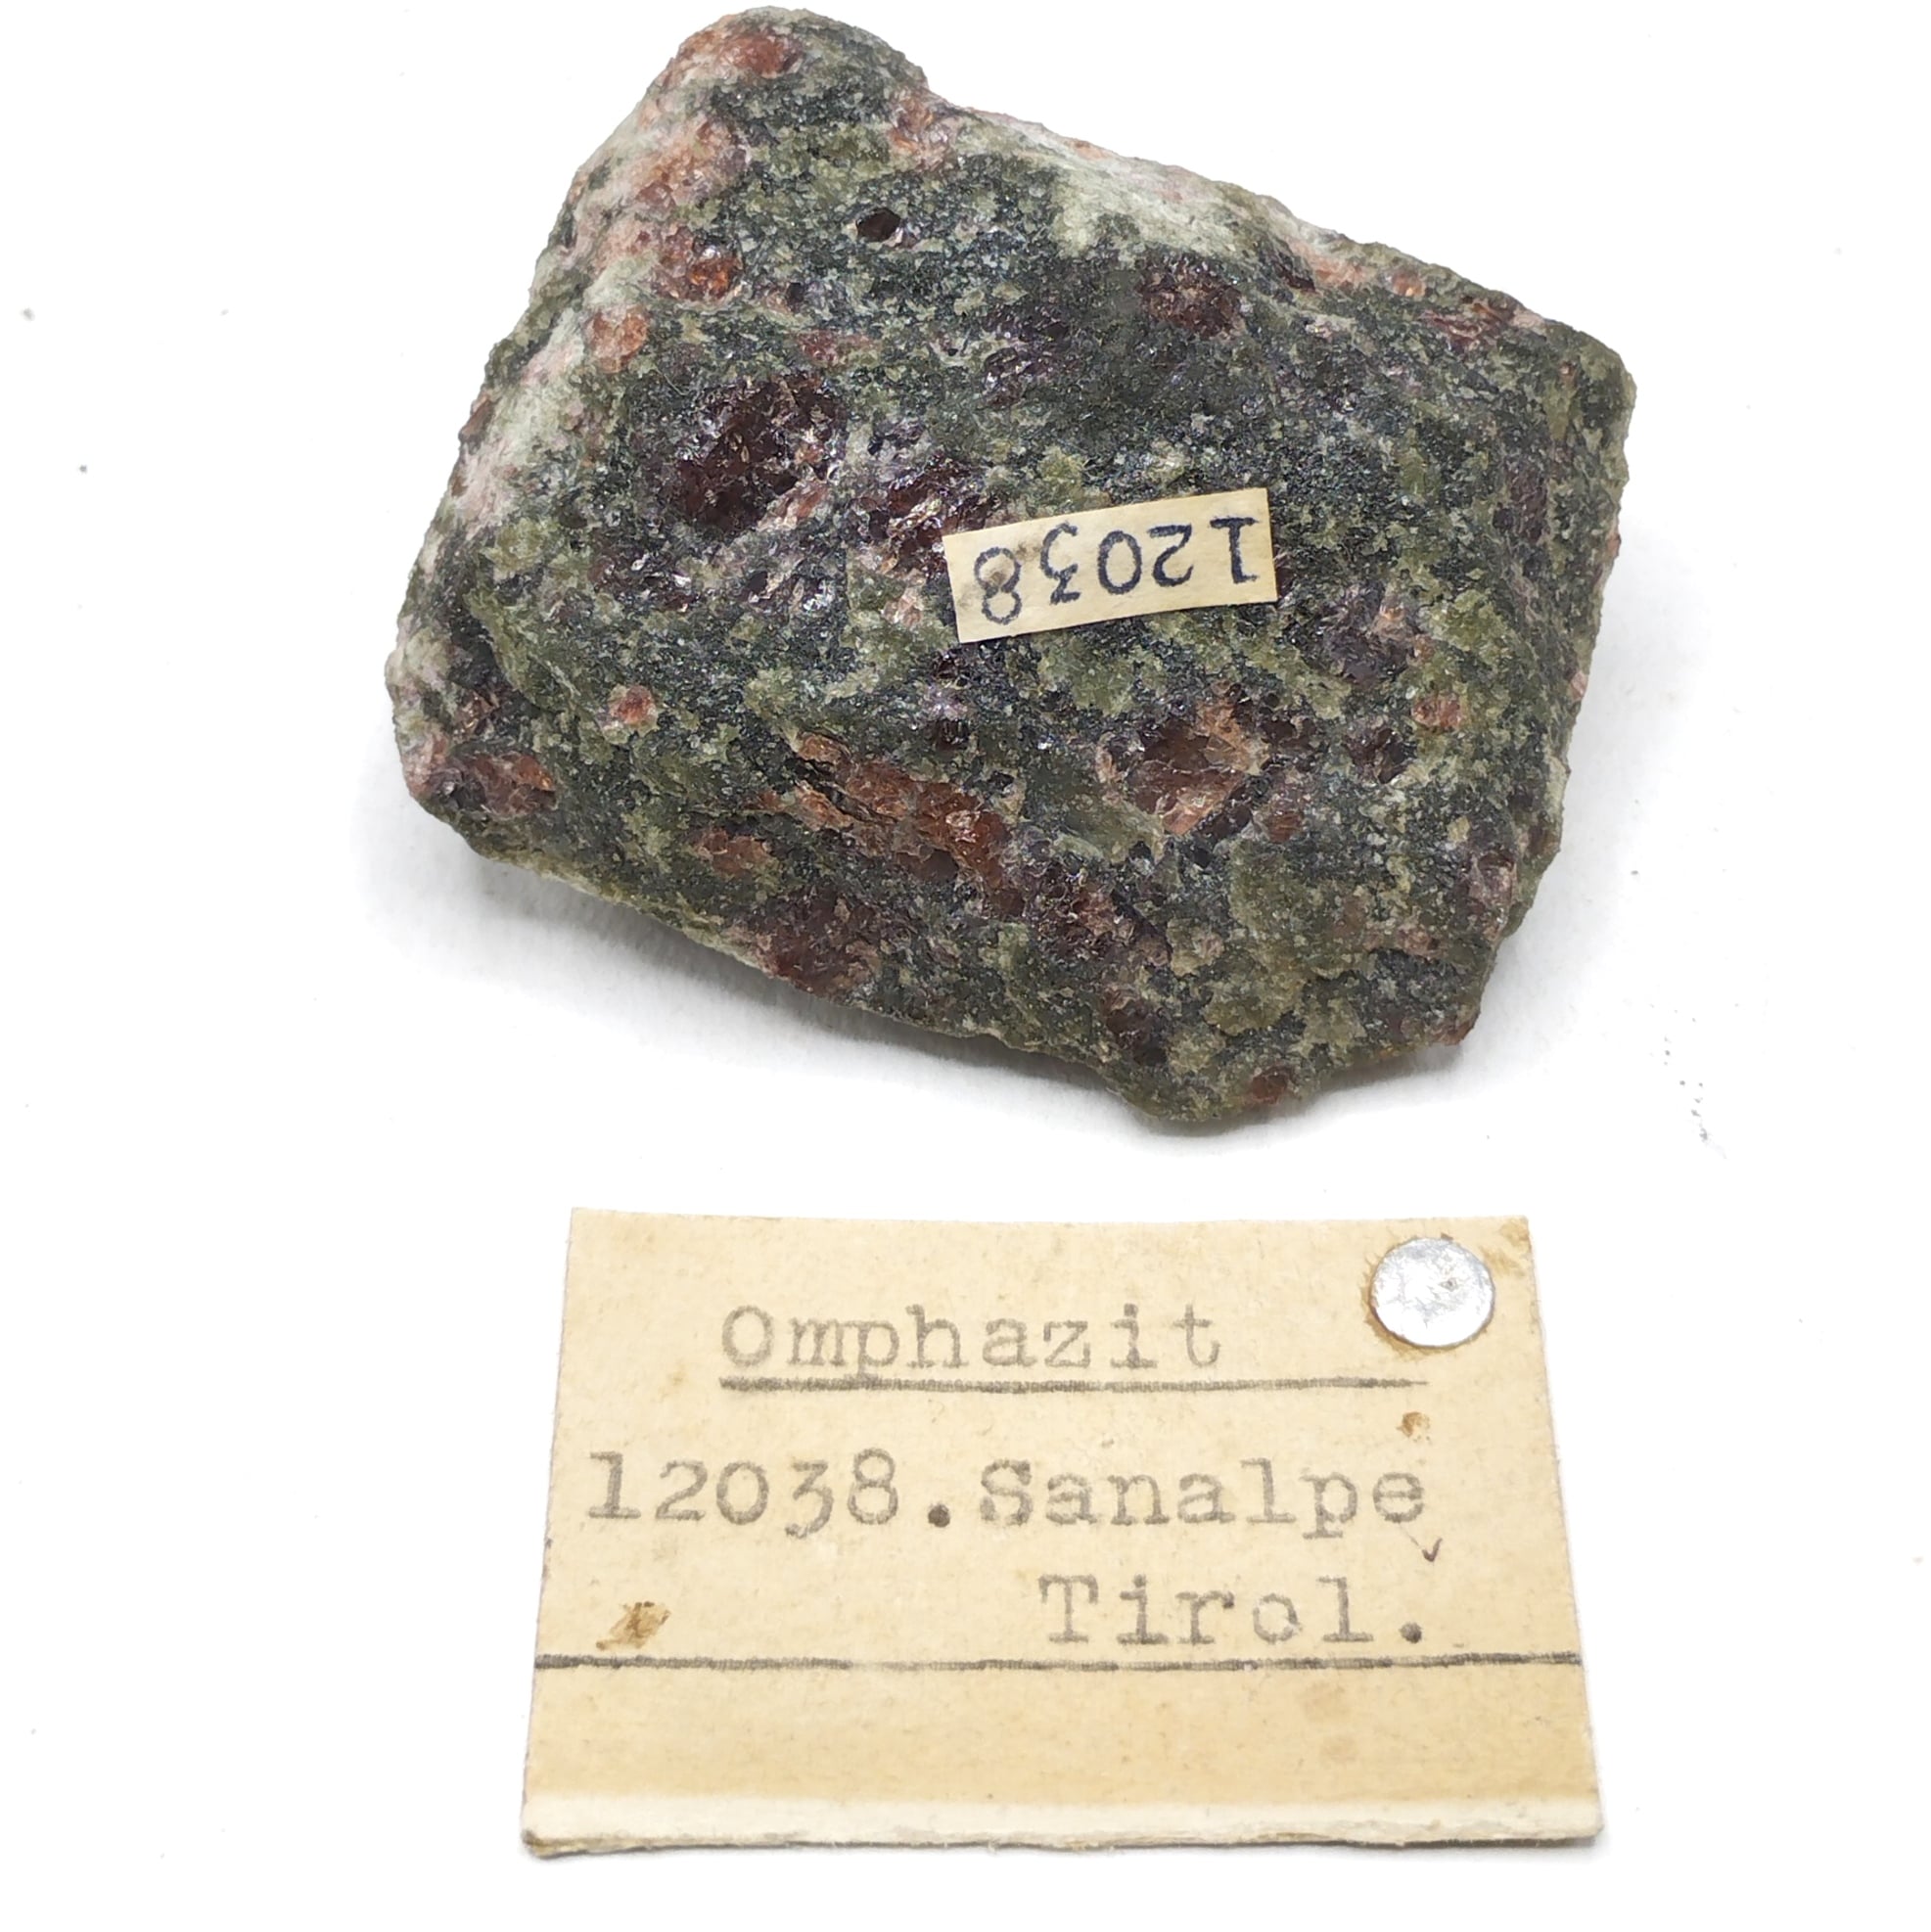 Omphazit (Omphacite), Sanalpe, Tyrol, Autriche.